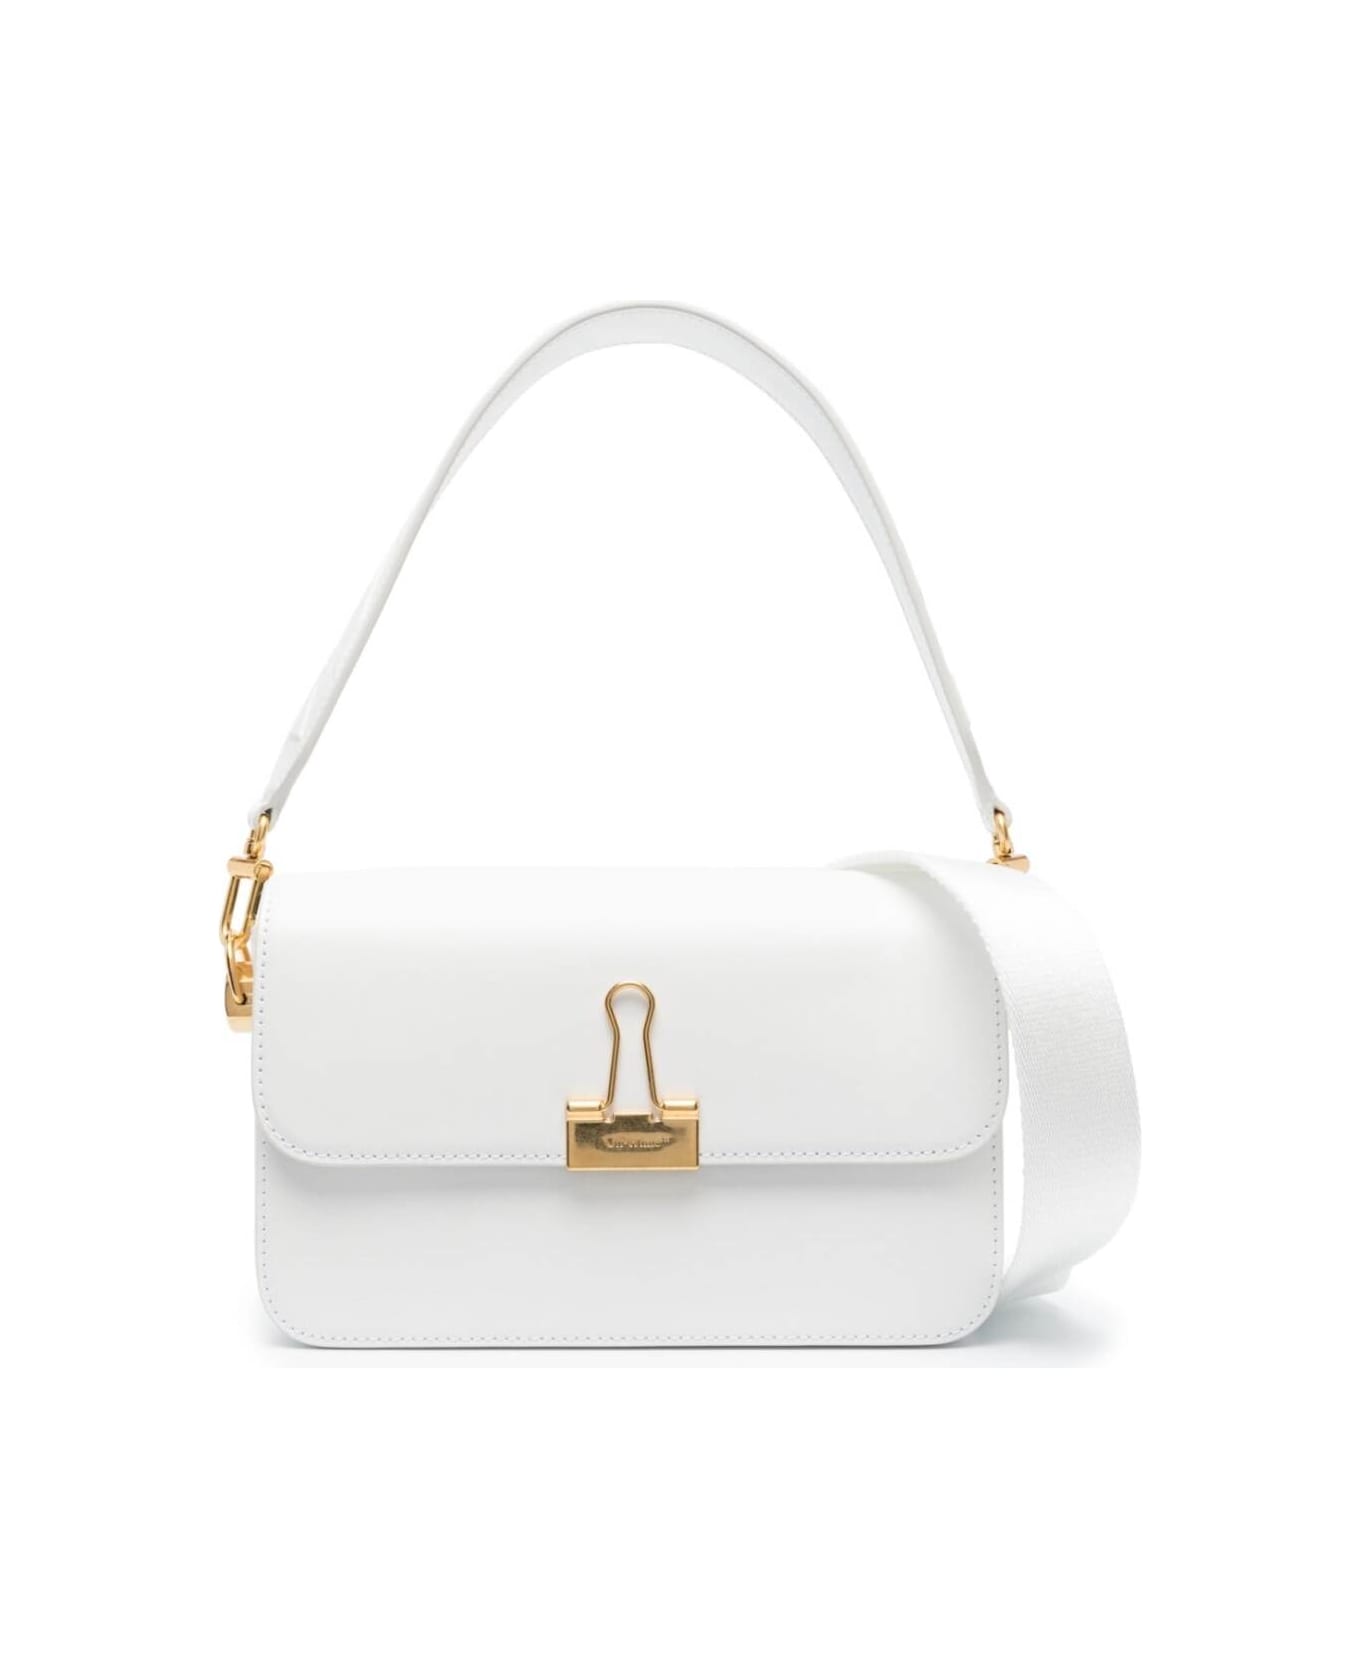 Binder Clip Crossbody Bag In White Leather Woman